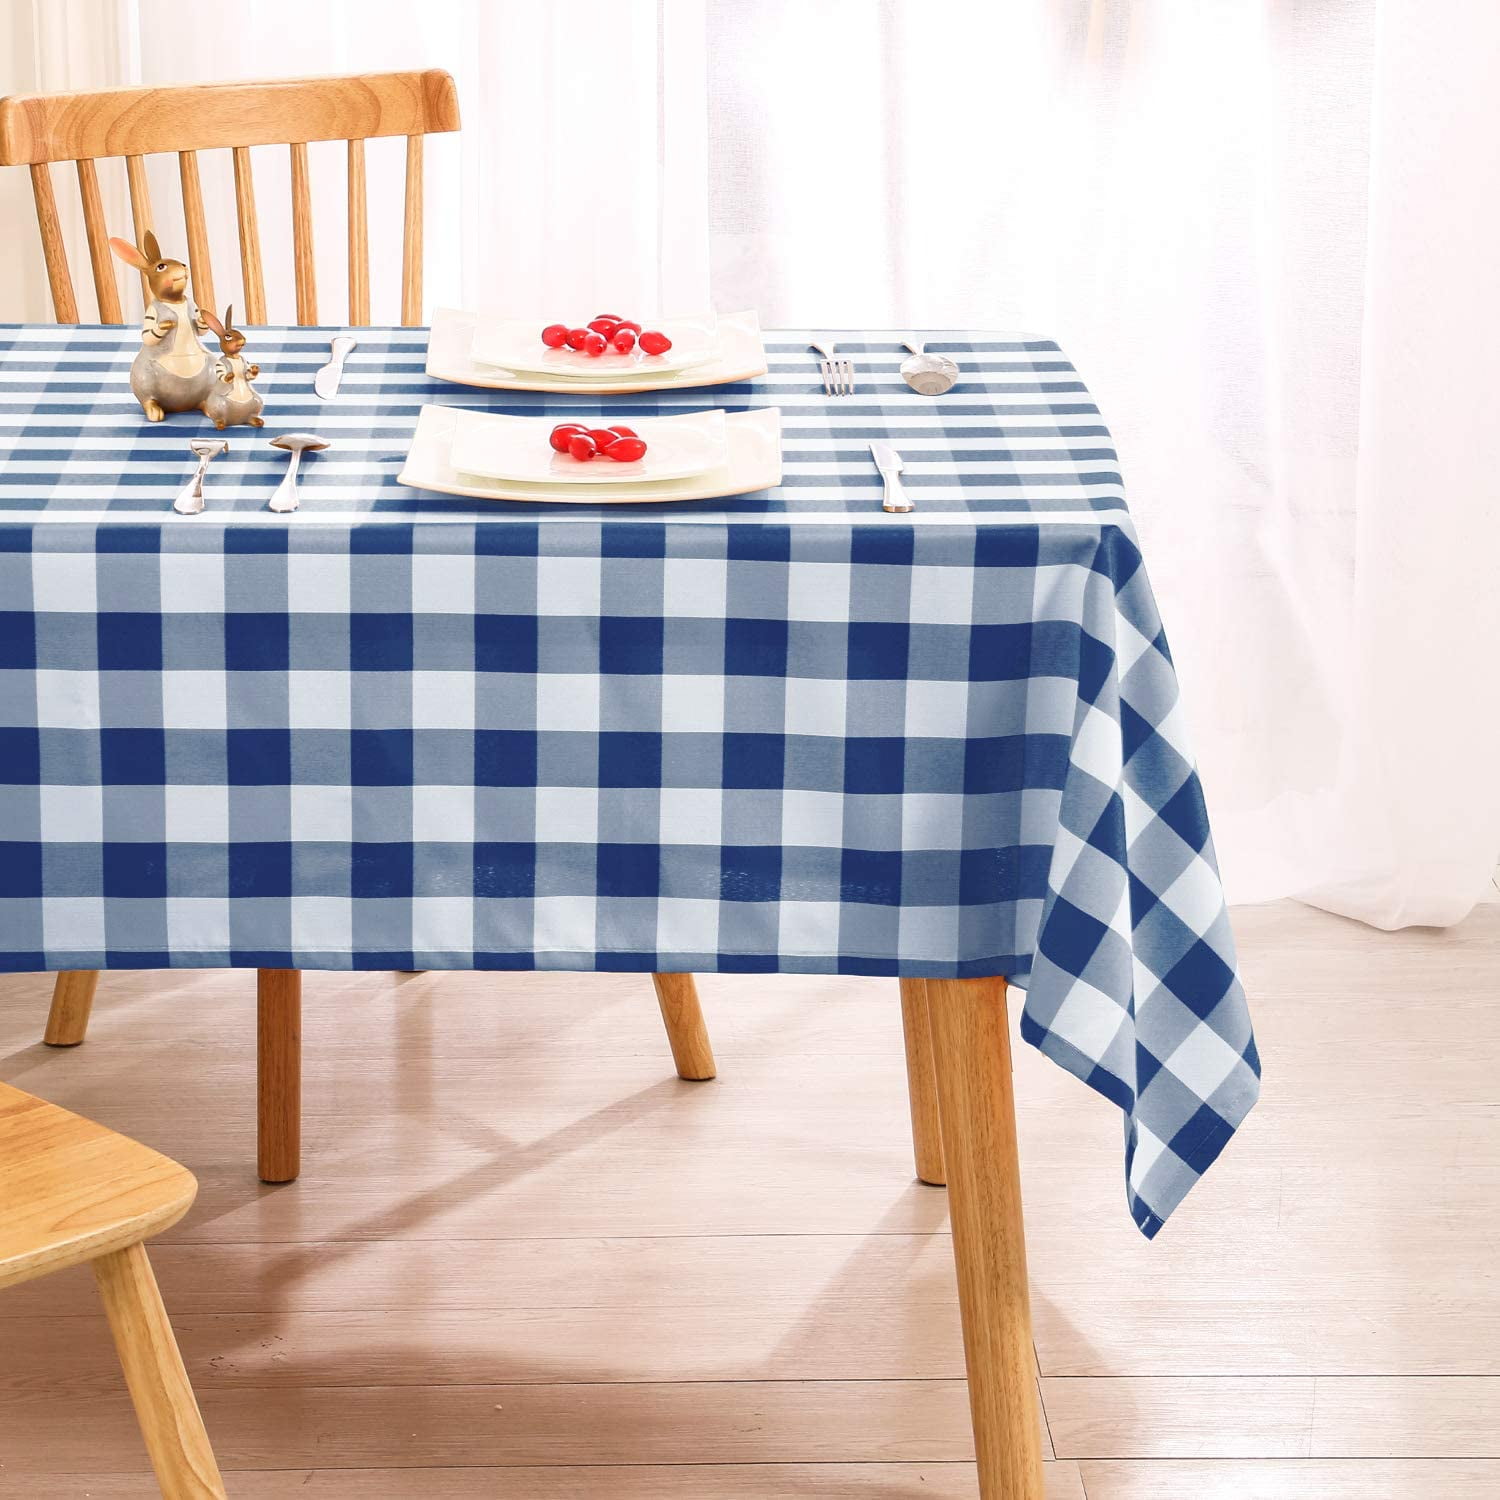 Plaid PVC Tablecloth Waterproof and Oilproof Nordic Home Decorative Table  Cover Picnic Table Cloth hules para mesas rectangular - AliExpress